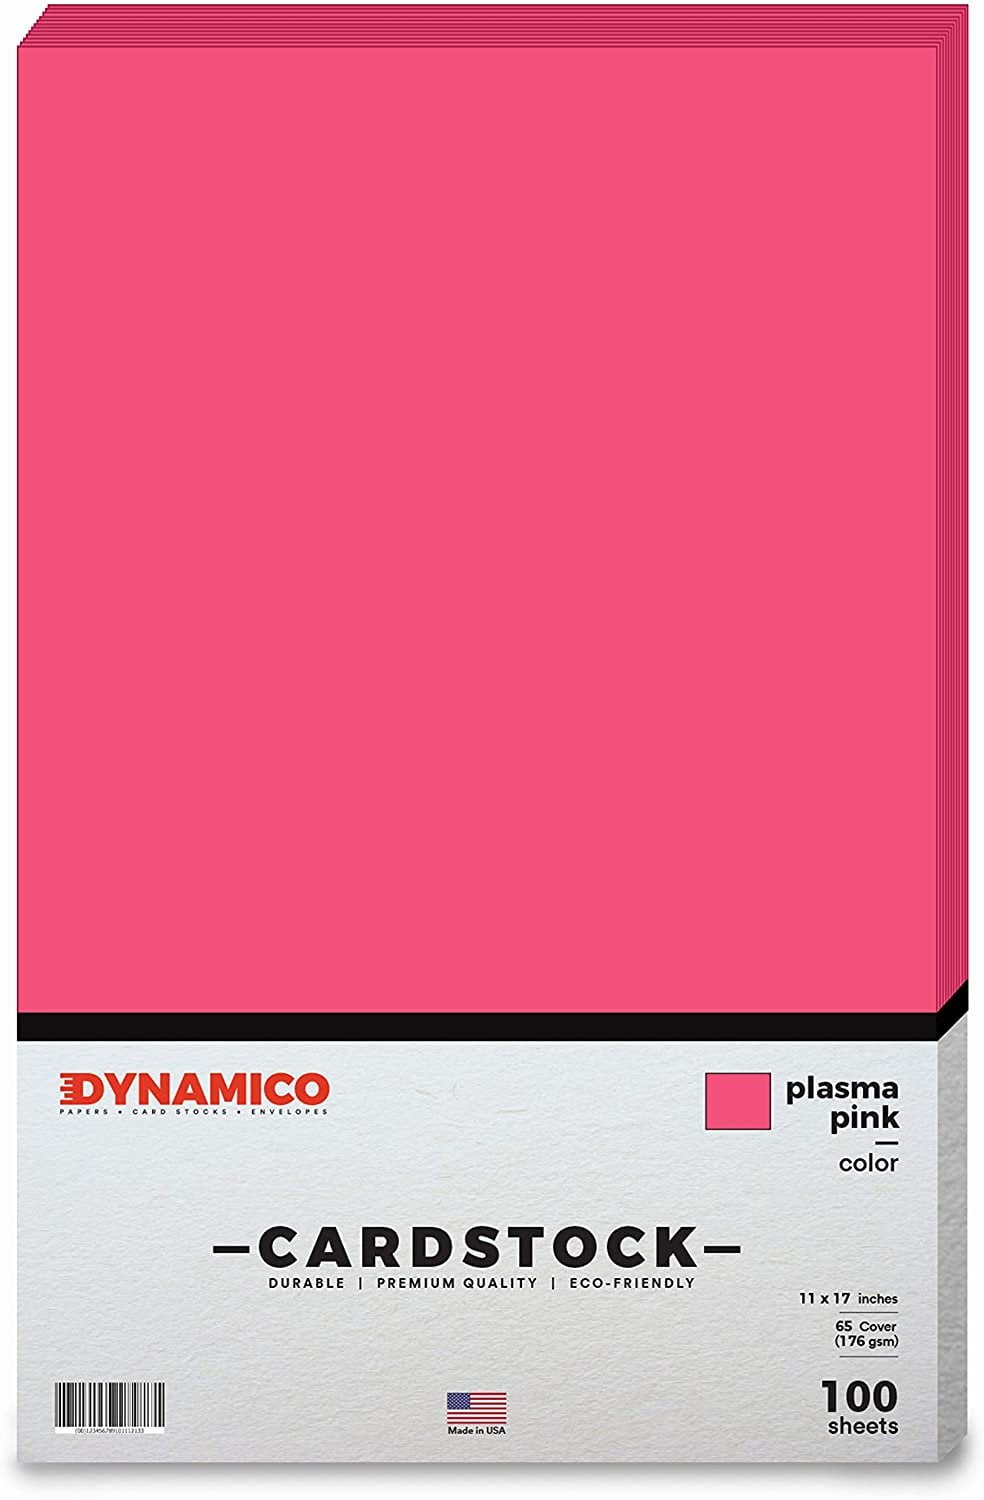 Lux 100 Lb. Cardstock Paper 8.5 X 11 Candy Pink 500 Sheets/pack  (81211-c-23-500) : Target